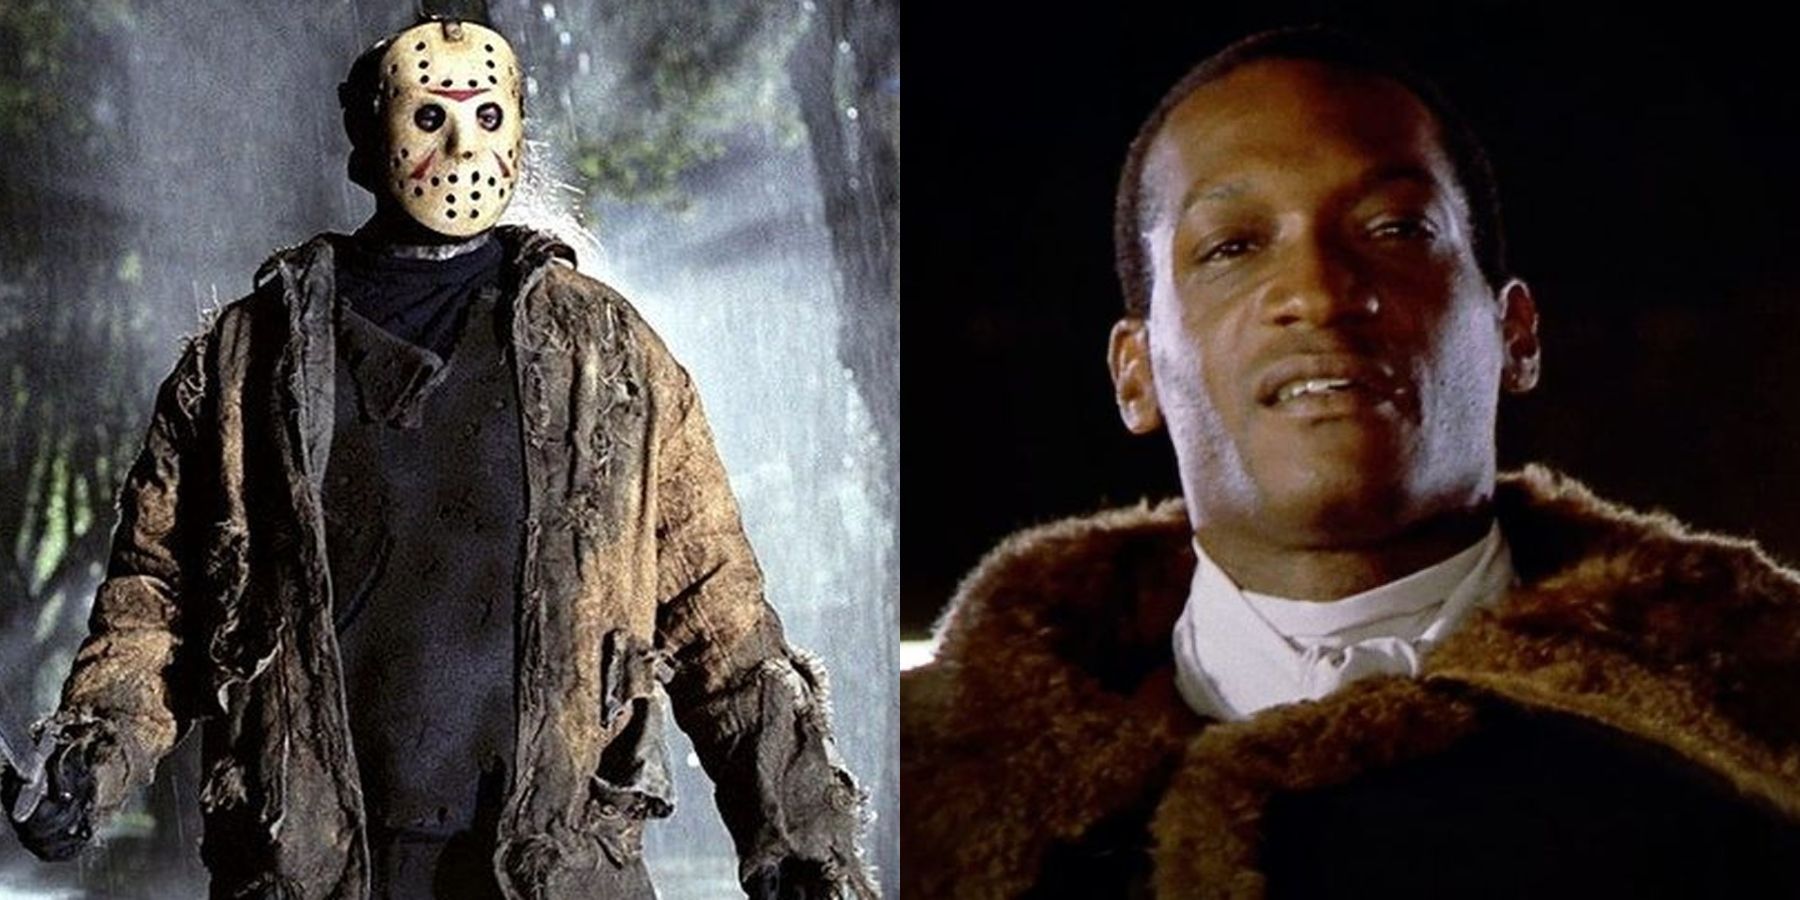 Split image of Jason Voorhees from Friday the 13th and Candyman